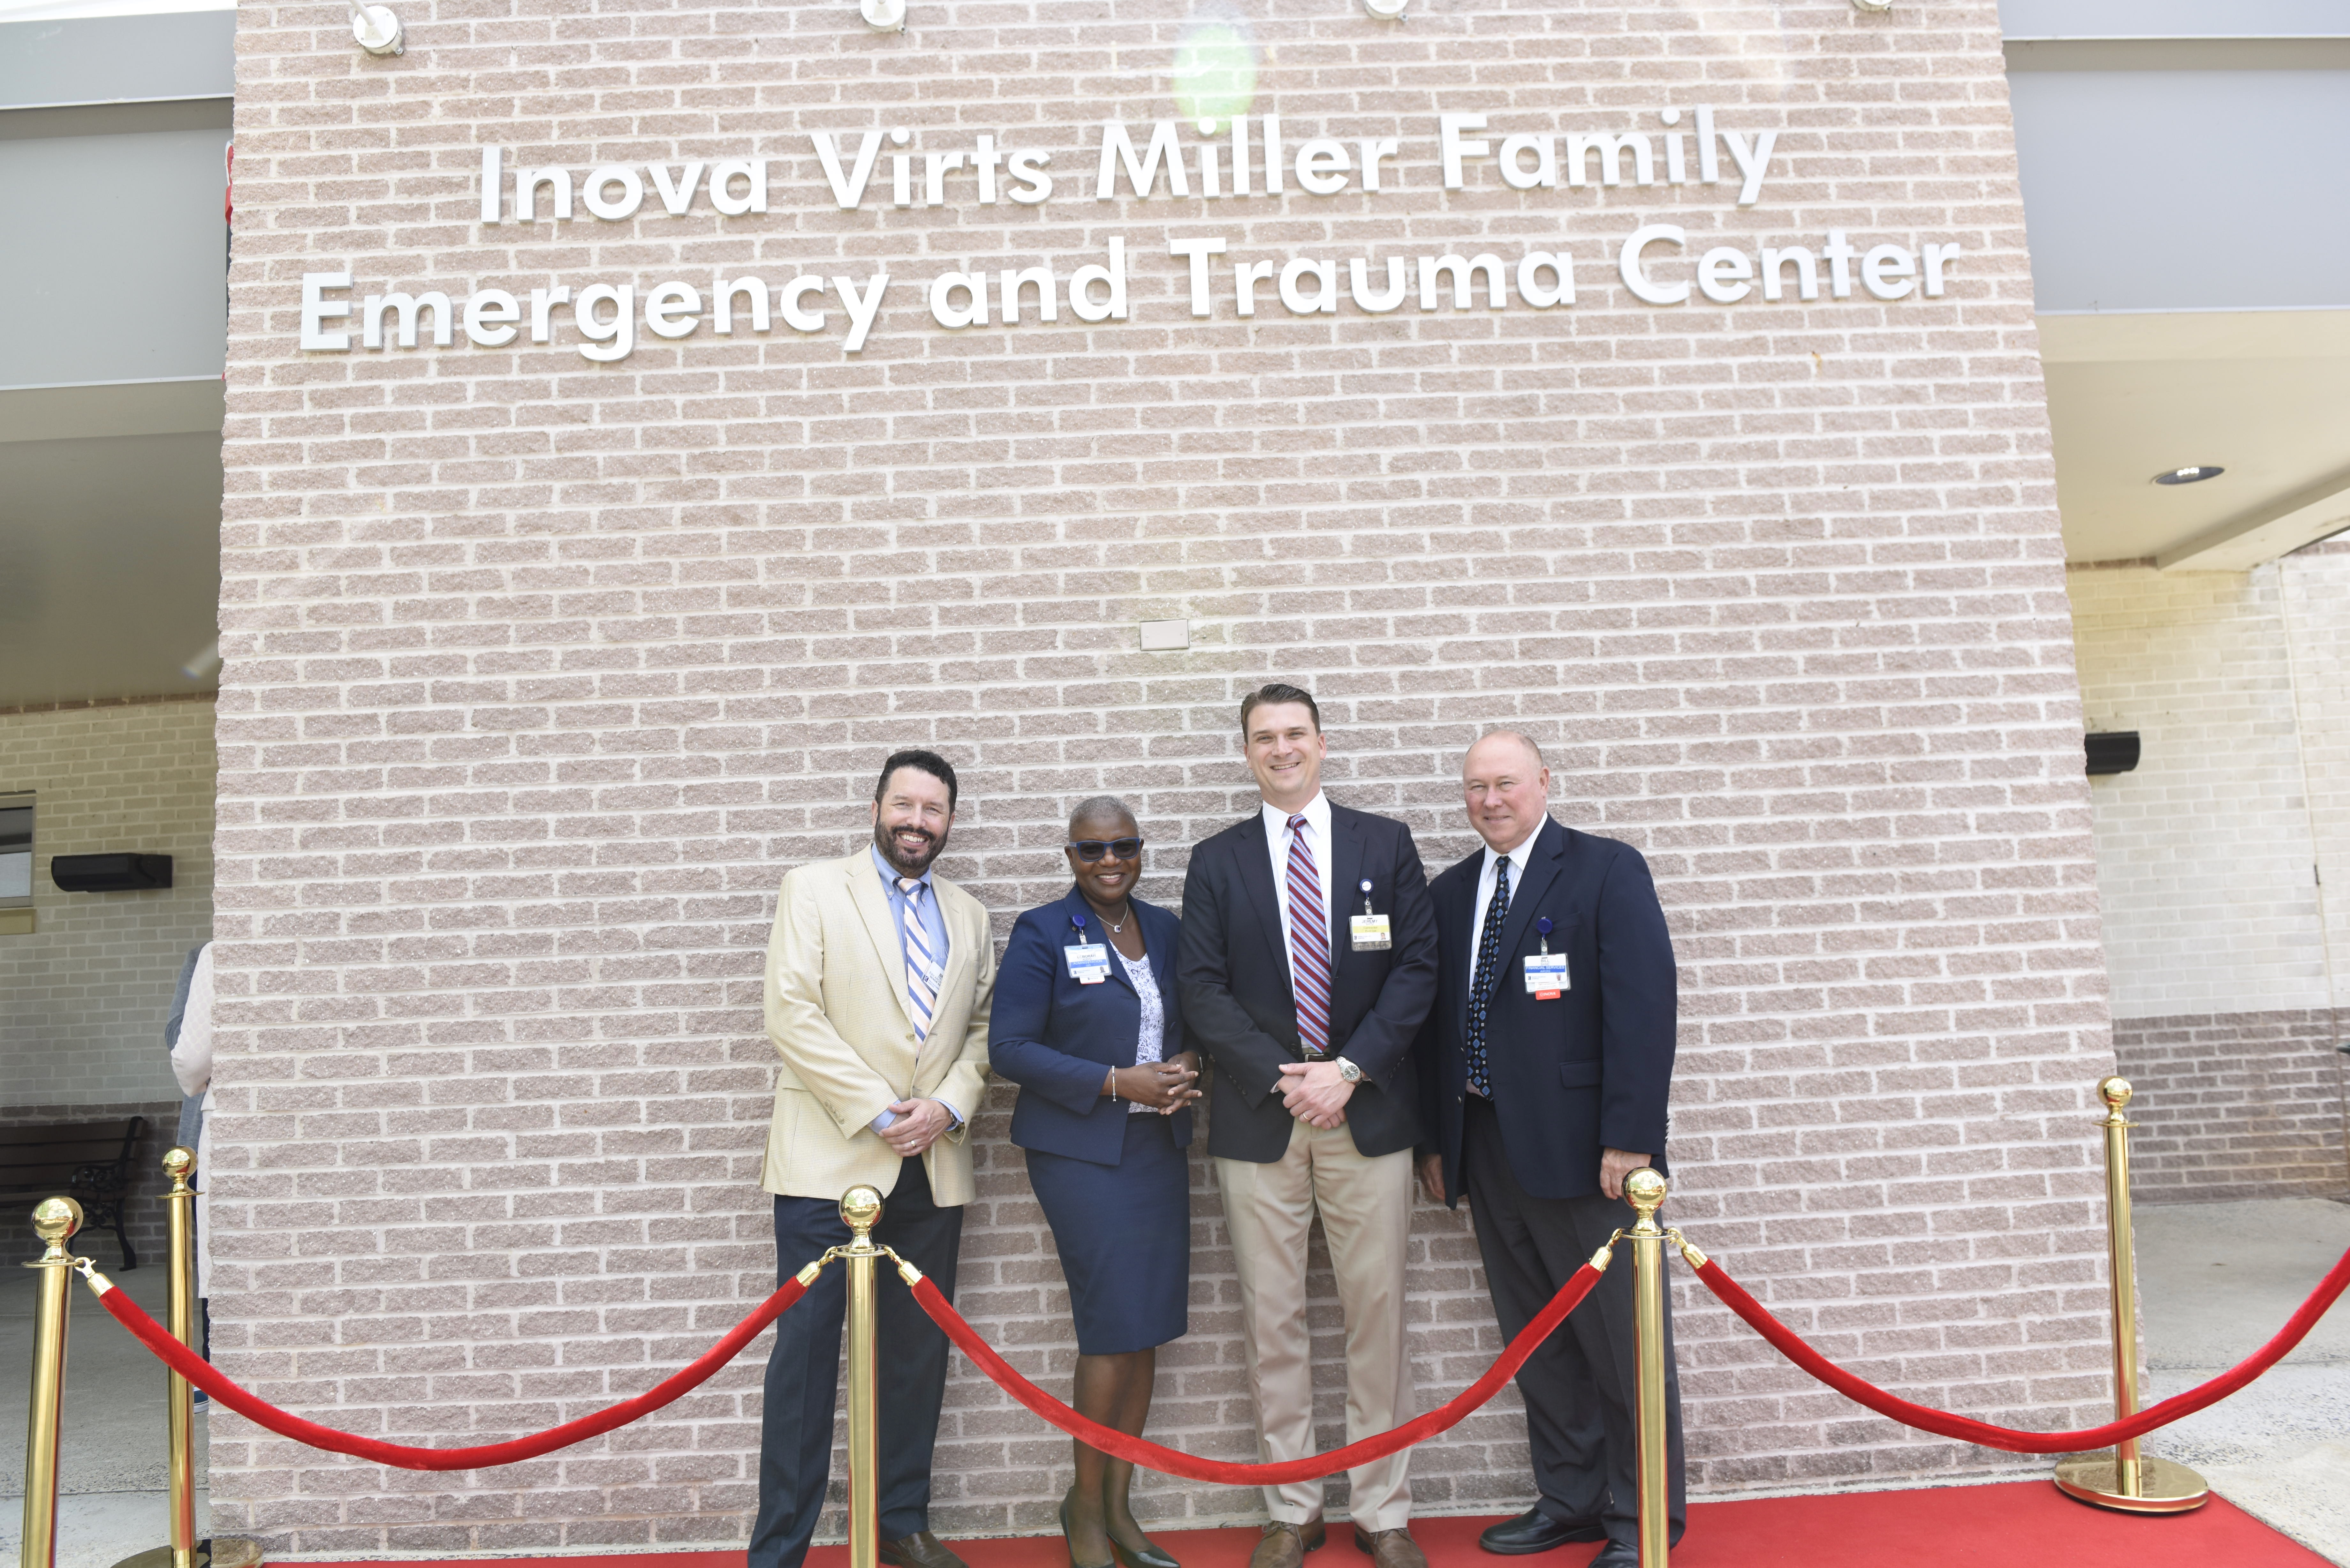 Inova Virts Miller Family Emergency Trauma Center ribbon cutting - Four people dressed in business attire smile while standing on a red carpet in front of a brick wall